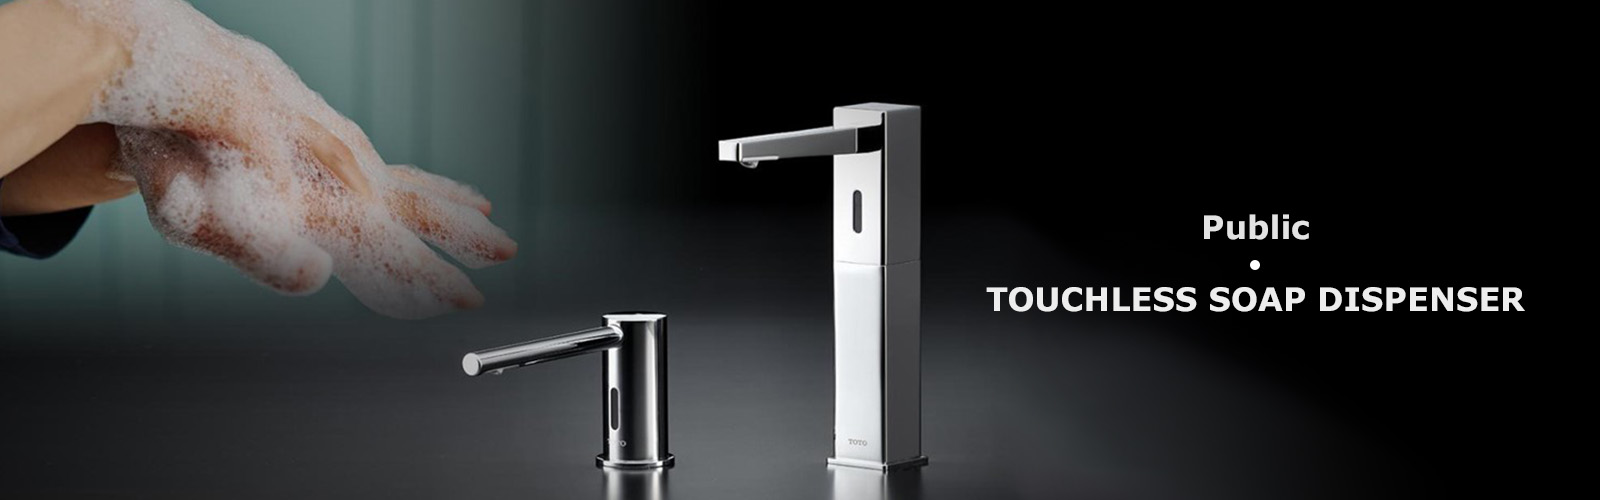 Image of TOUCHLESS SOAP DISPENSER